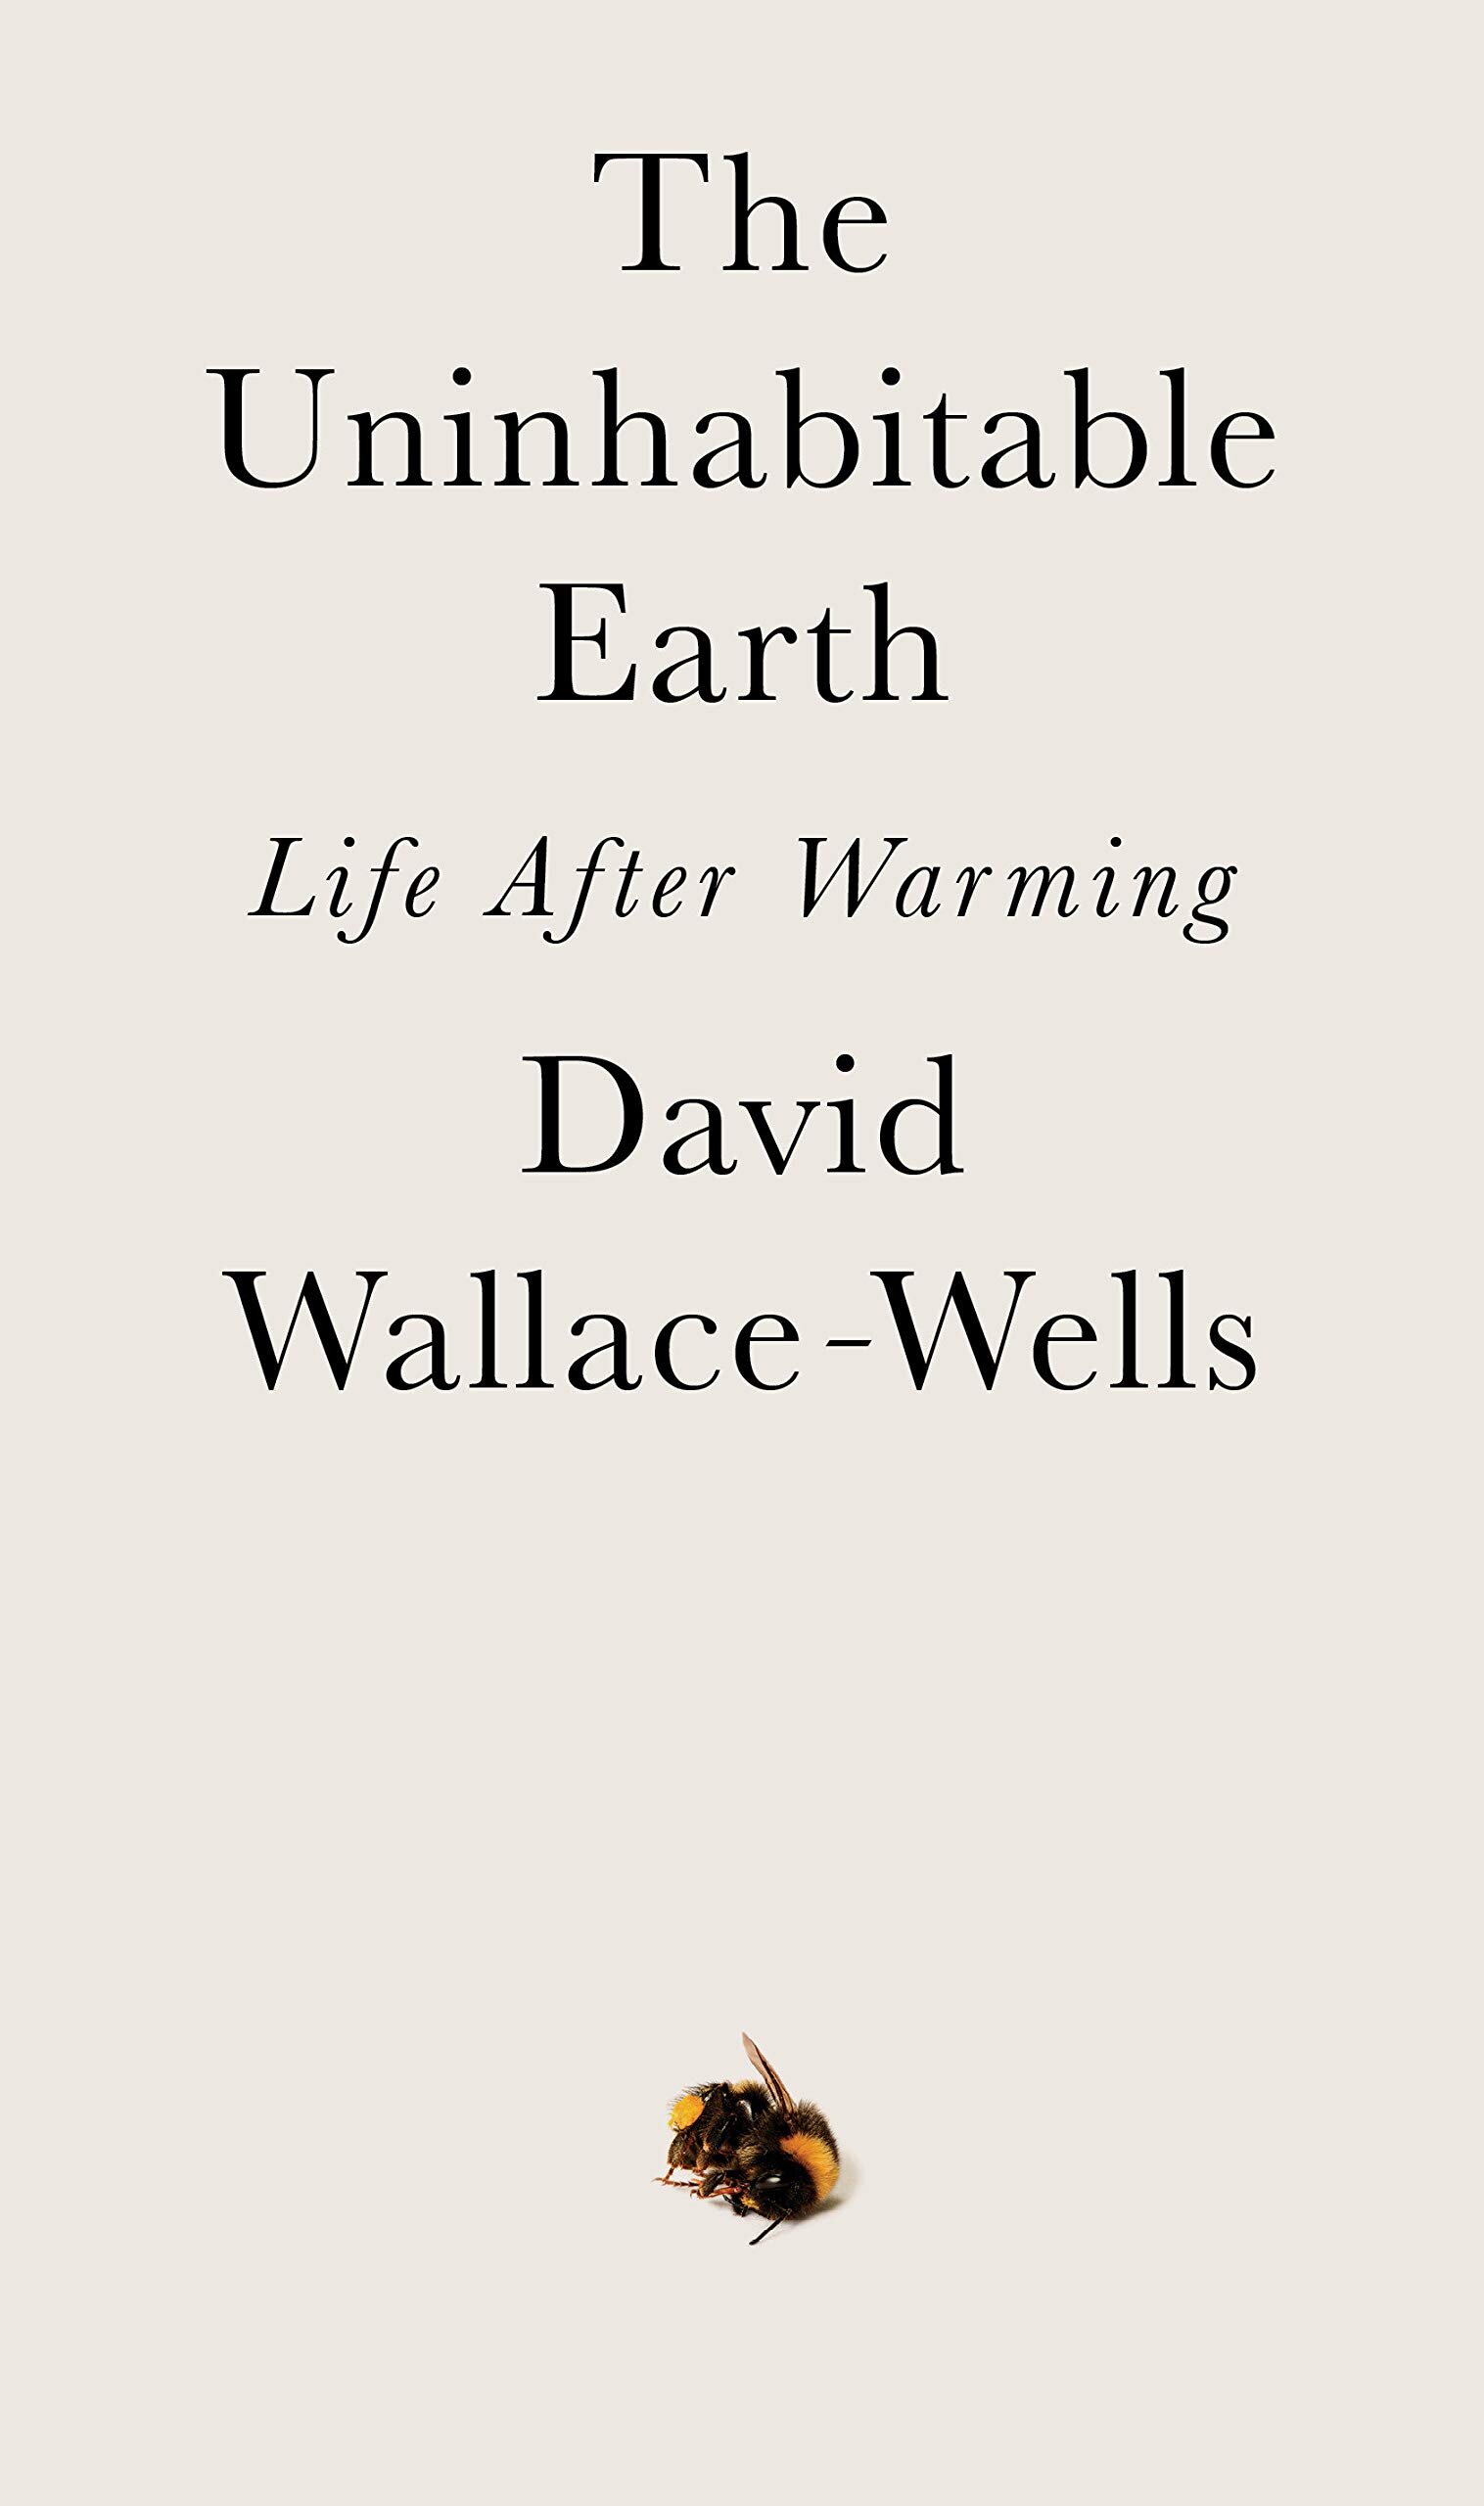 Science The Uninhabitable Earth Life After Warming by David Wallace-Wells.jpg